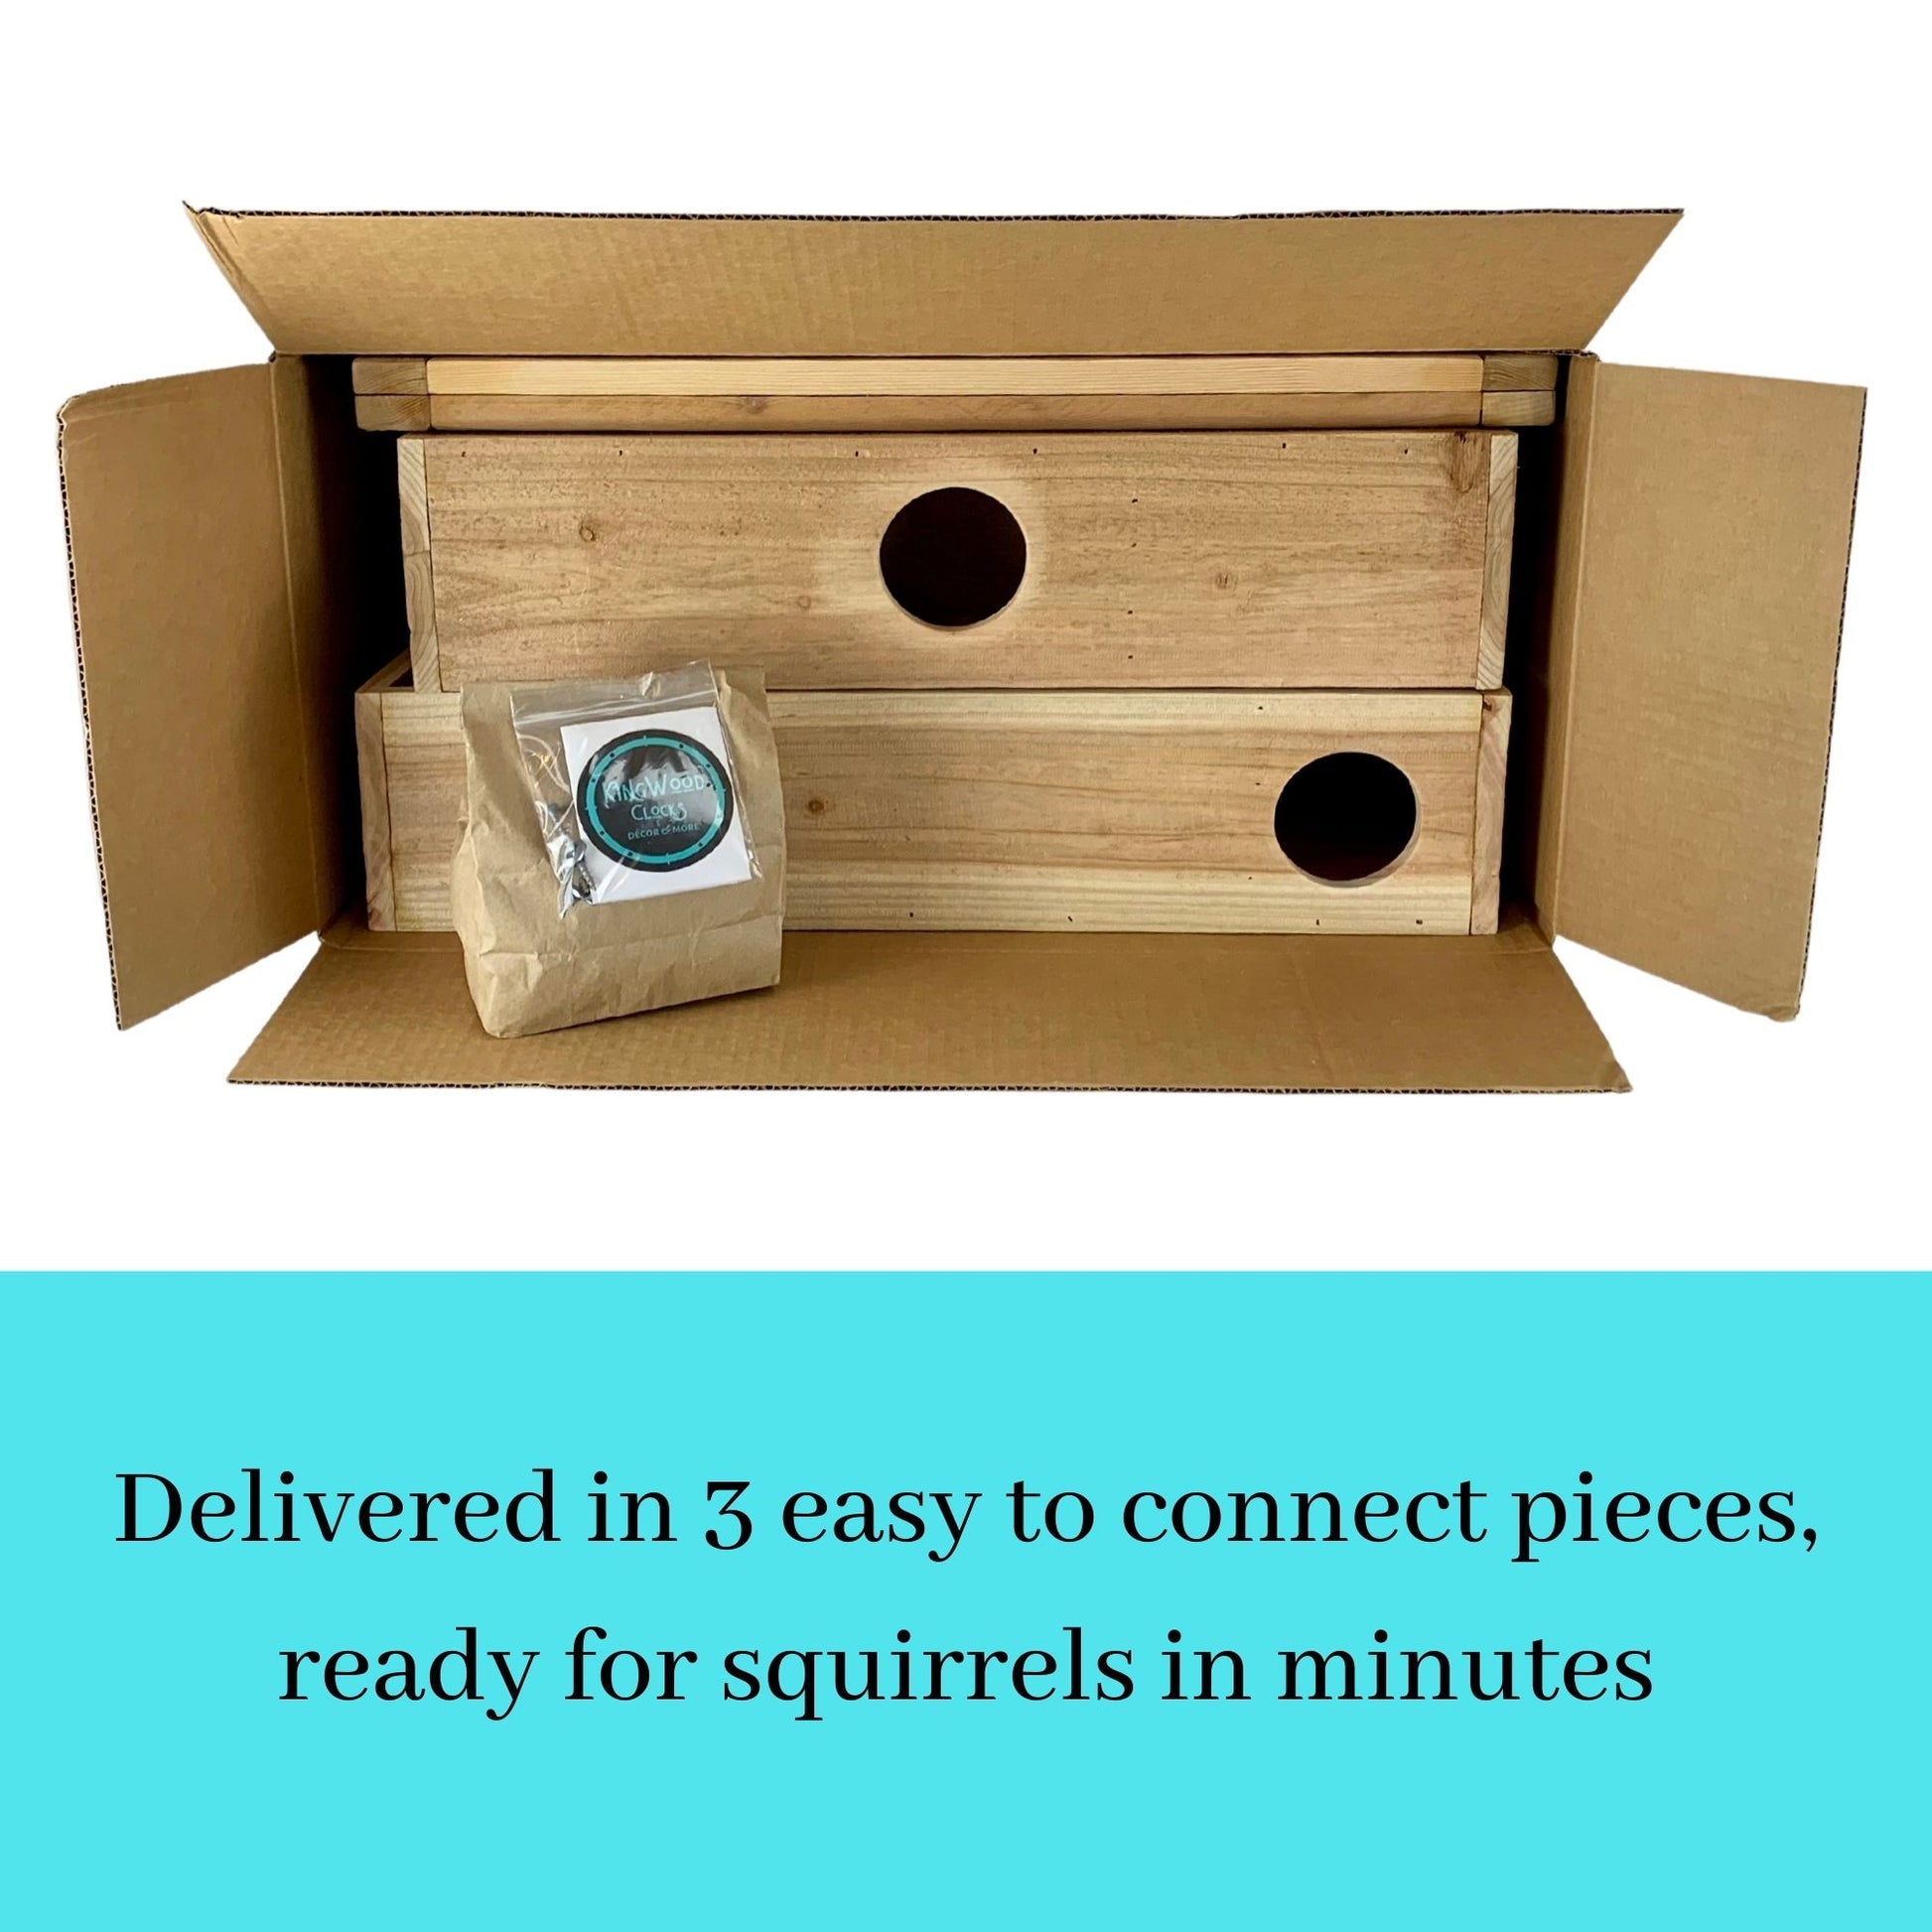 KingWood Squirrel Maze Feeder arrives well packed and ready for quick assembly